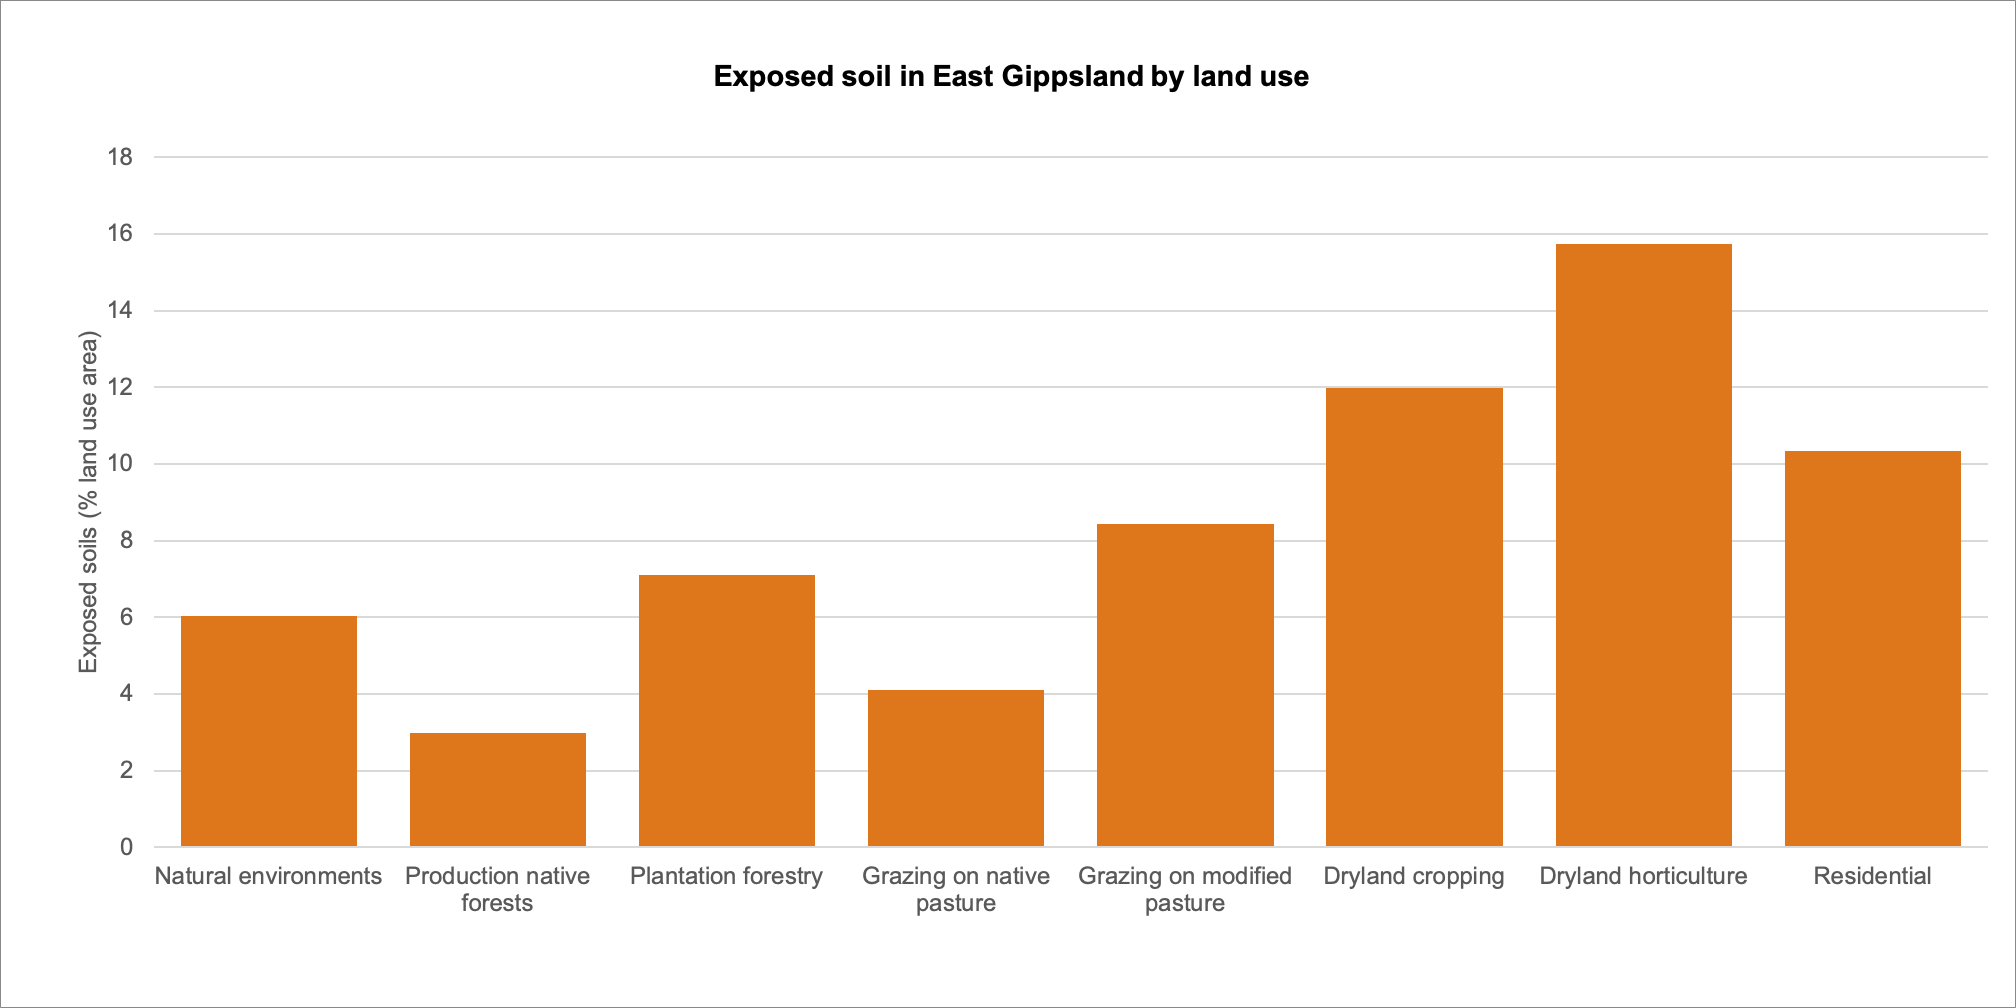 Percentage exposed soil by land use category